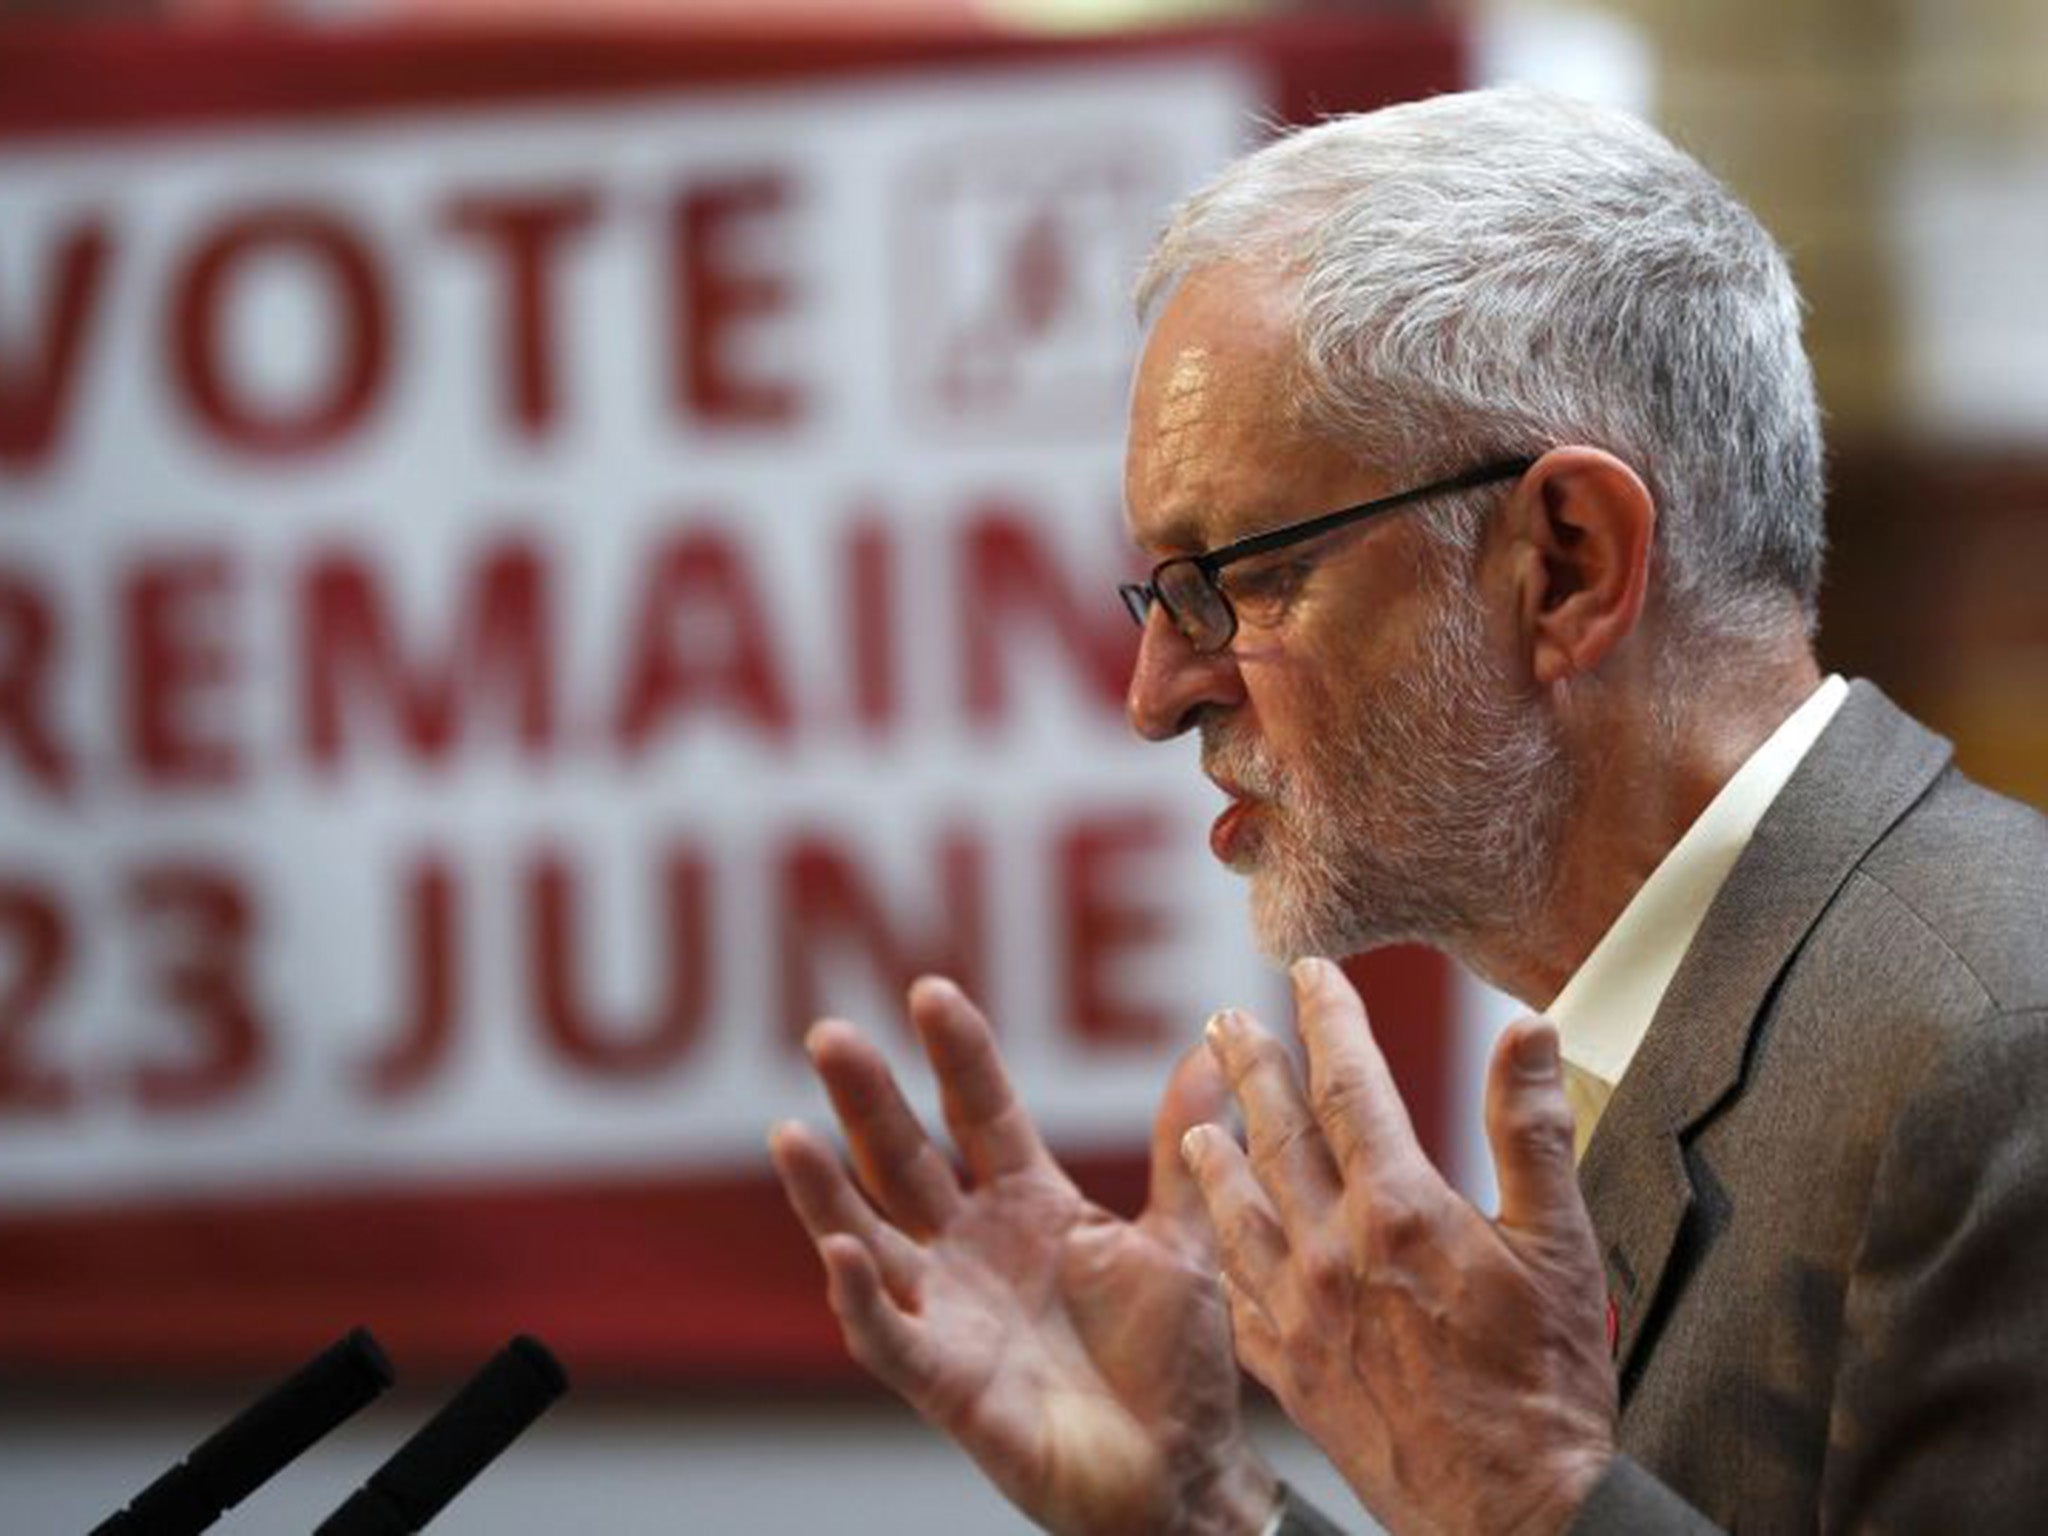 Jeremy Corbyn’s difficult reign as Labour leader shows no signs it will get any easier